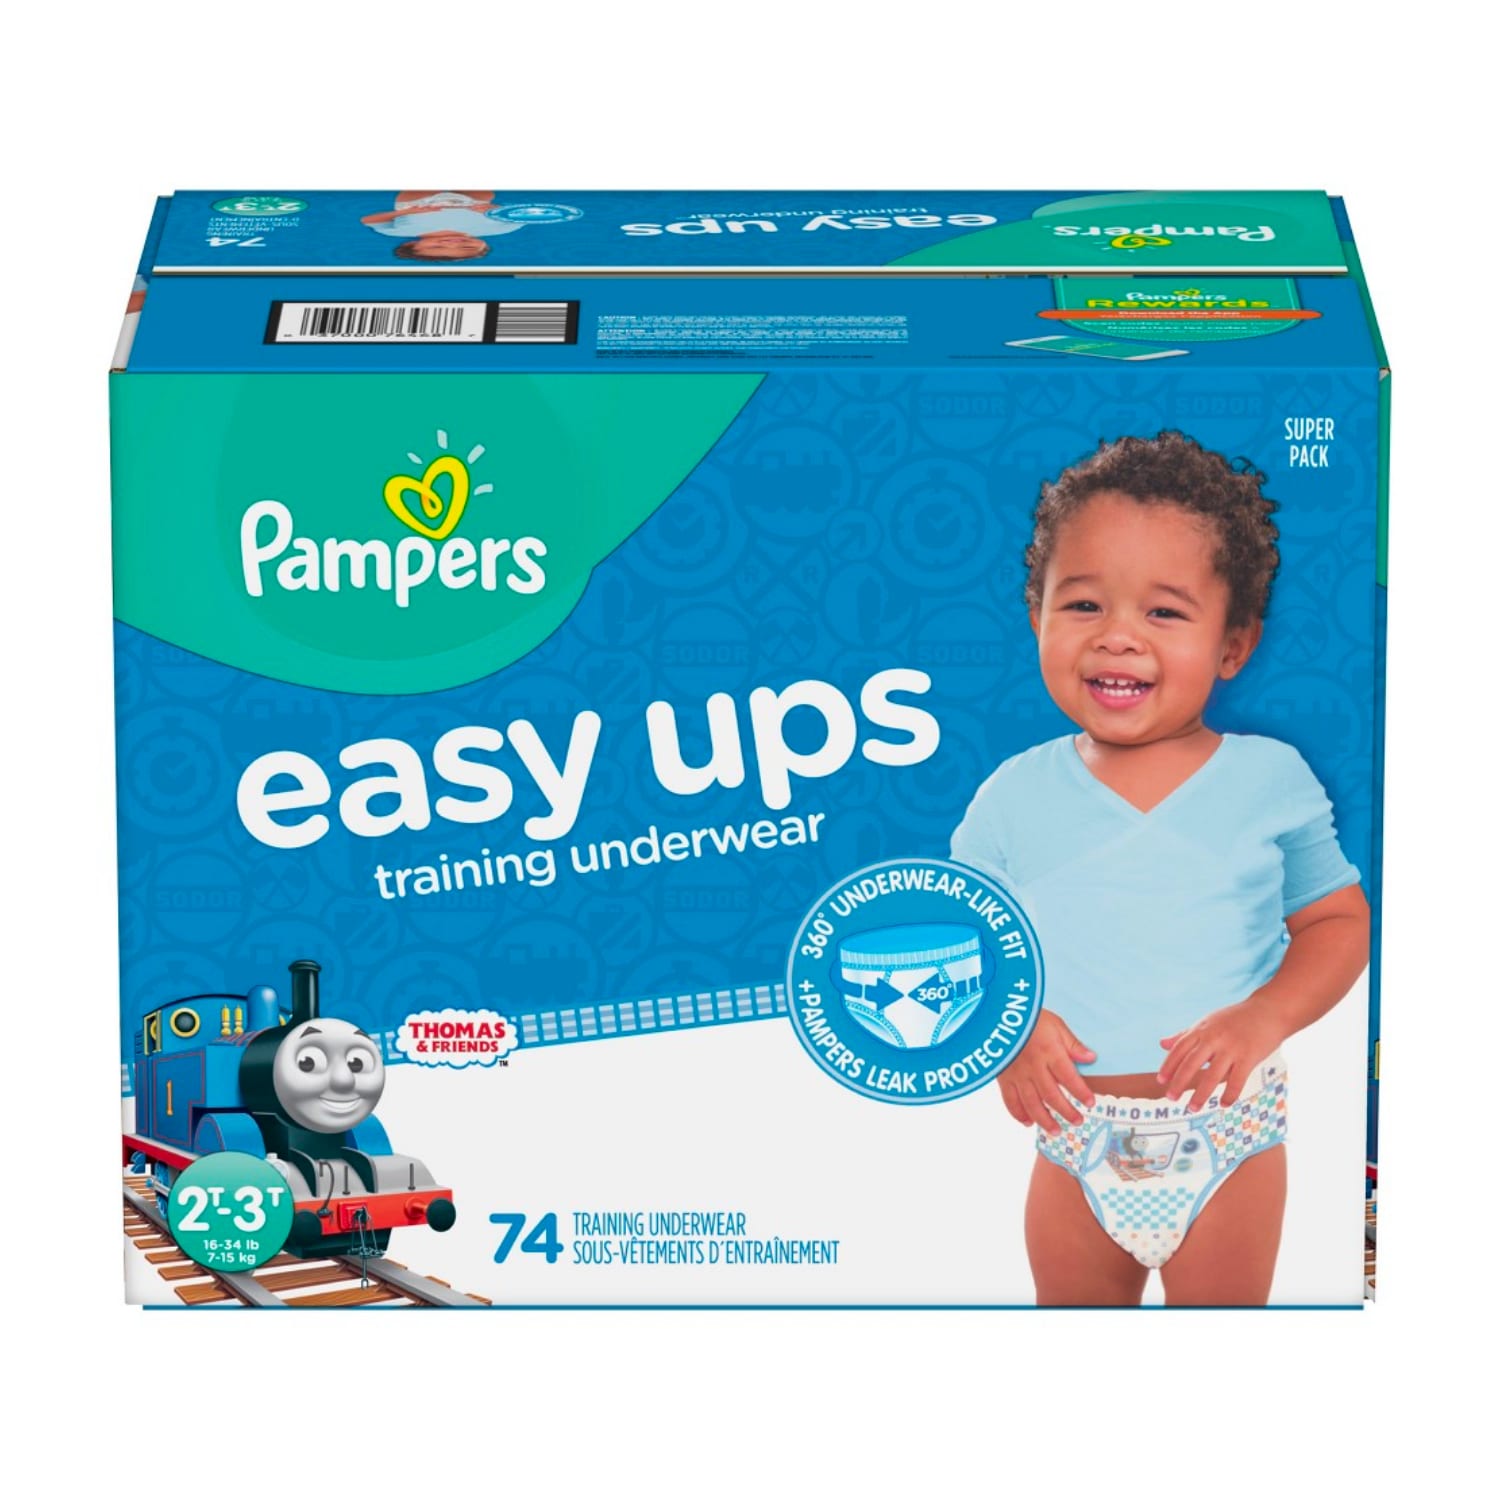 Pampers Easy Ups Training Underwear Boys, Size 4 2T-3T, 74